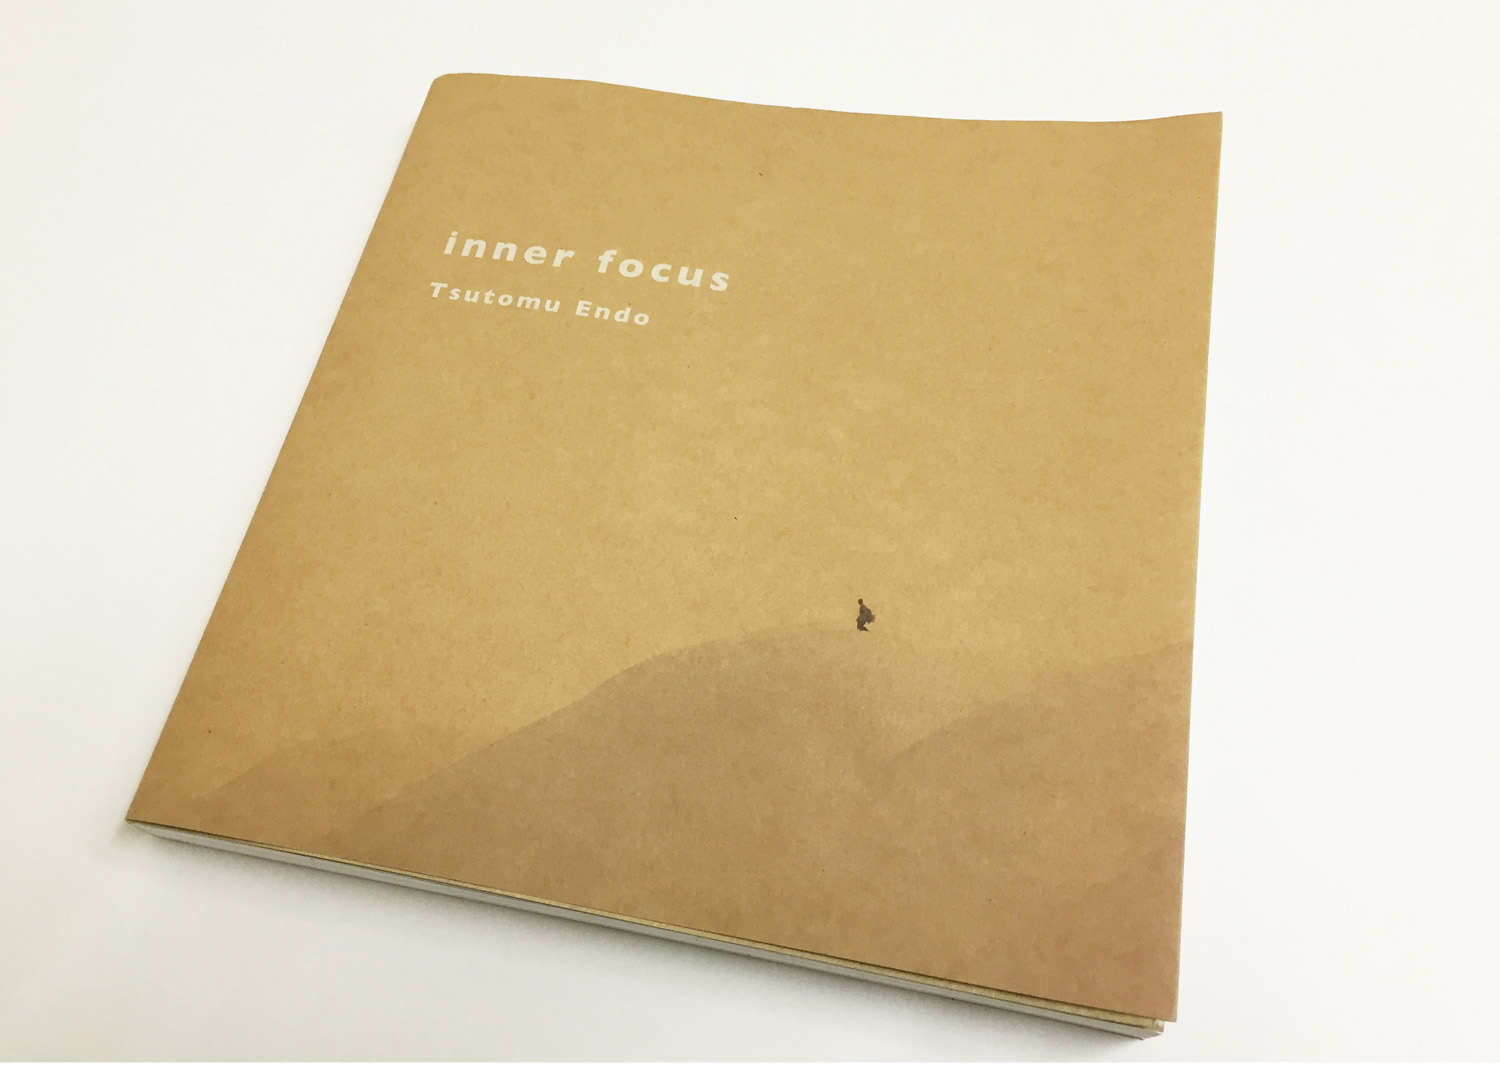 A photo book that was the culmination of 11 years by photographer Tsuyoshi Endo, which was released on November 20th last year. inner focus Size: B18 variant, number of pages: 4 pages, price: ¥ 204 (excluding tax), publication: Shogakukan, contact: 4,200-03-5281